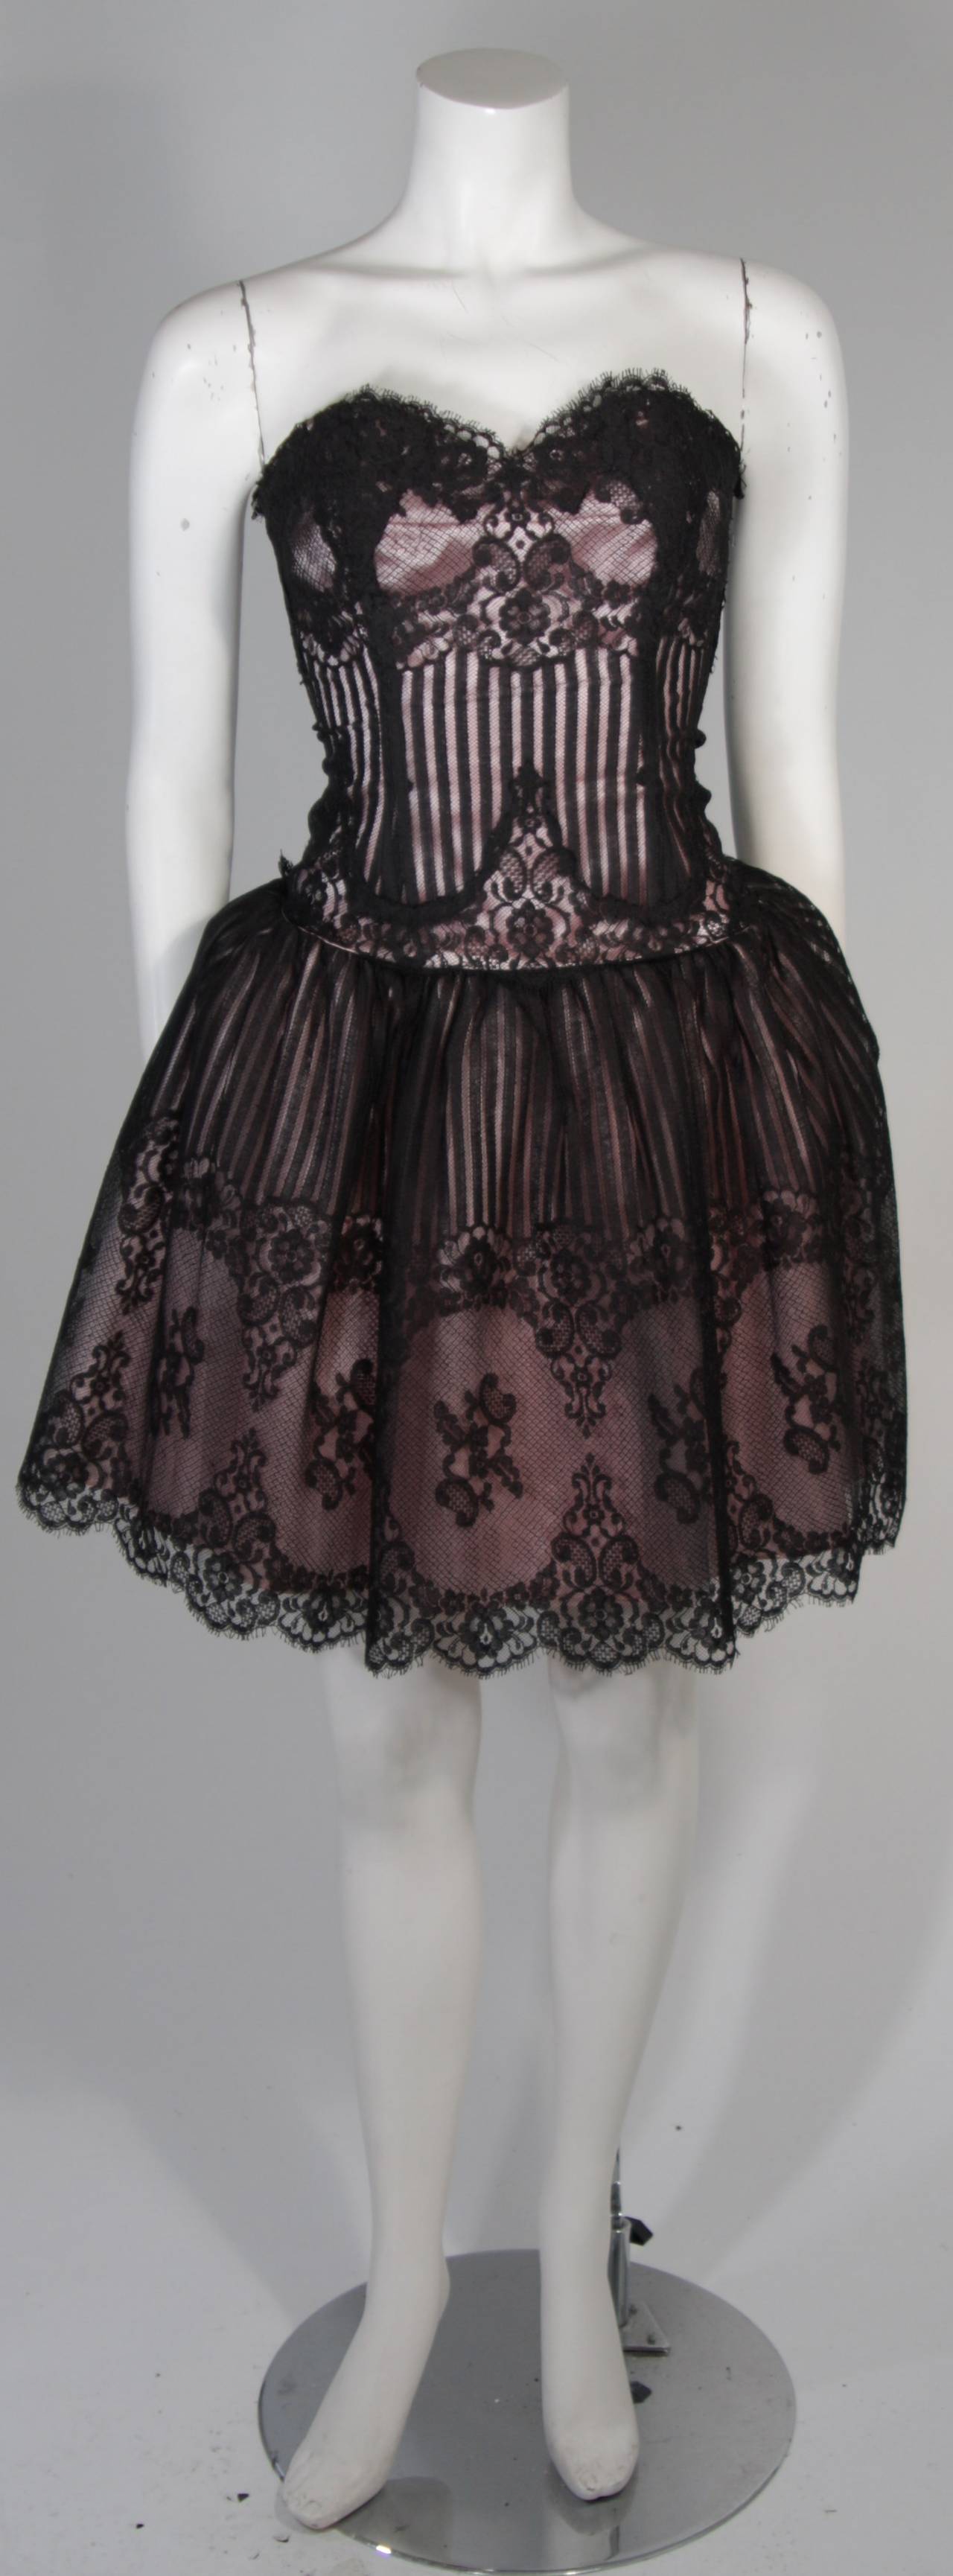 This Victor Costa cocktail gown is composed of black lace and is accented with a pink silk lining. There is a center back zipper closure. In excellent condition. 

**Please cross-reference measurements for personal accuracy.

Measures